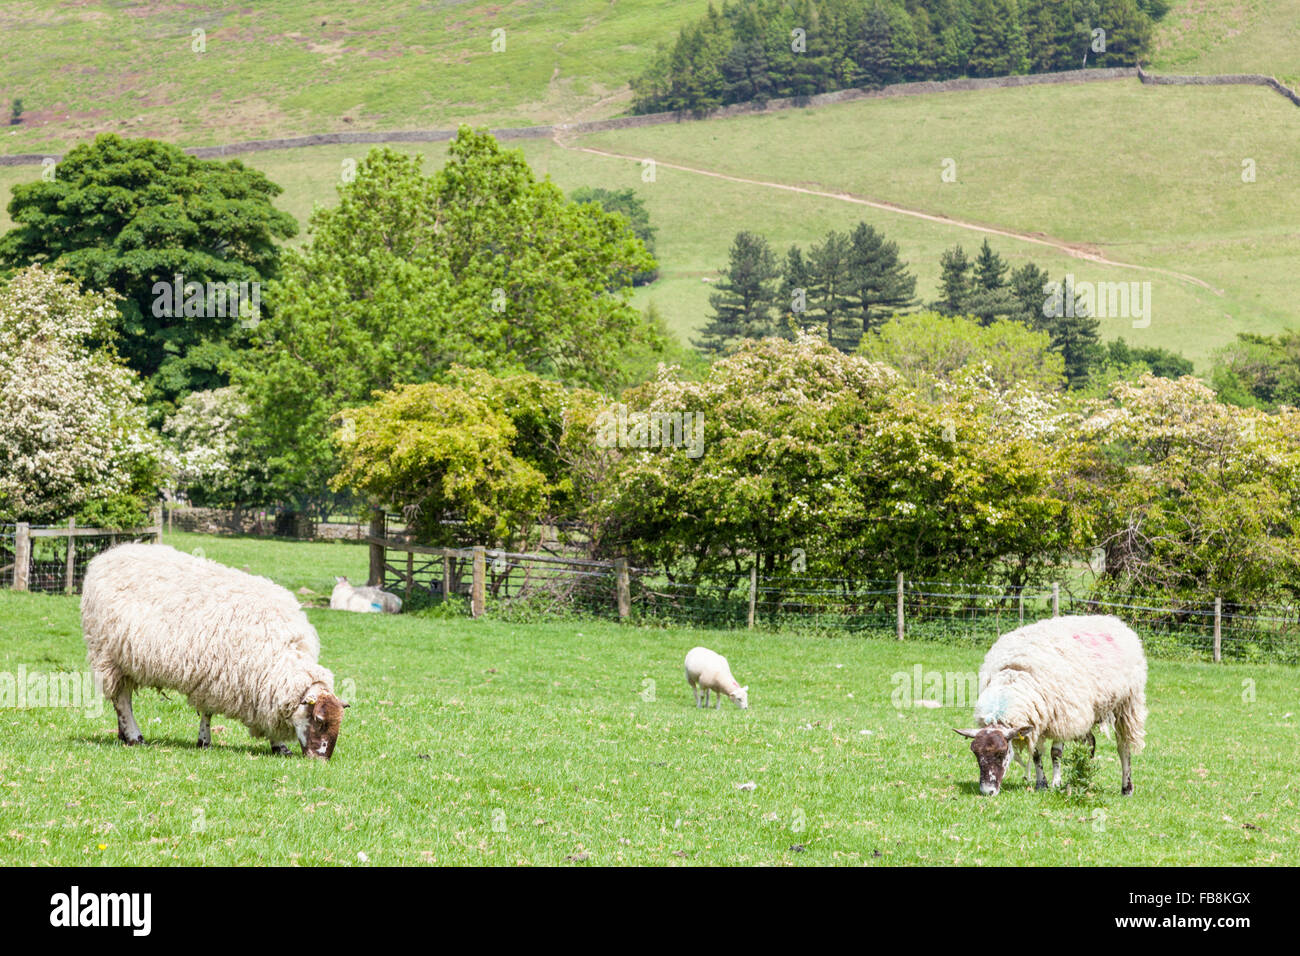 Sheep grazing in a field during Summer, Edale, Derbyshire, Peak District, England, UK Stock Photo